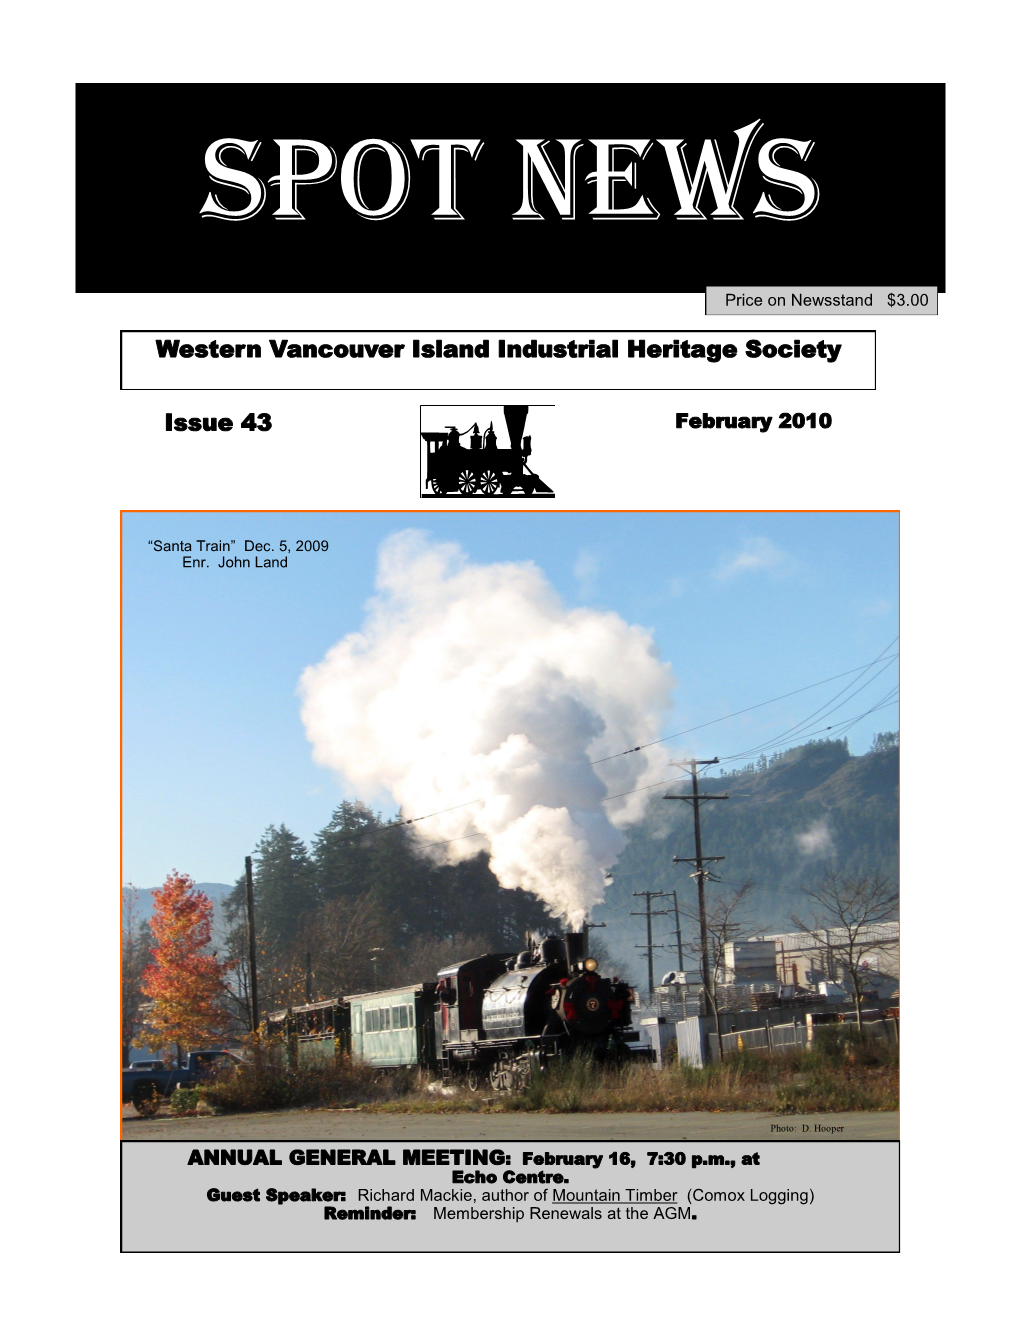 Western Vancouver Island Industrial Heritage Society Issue 43